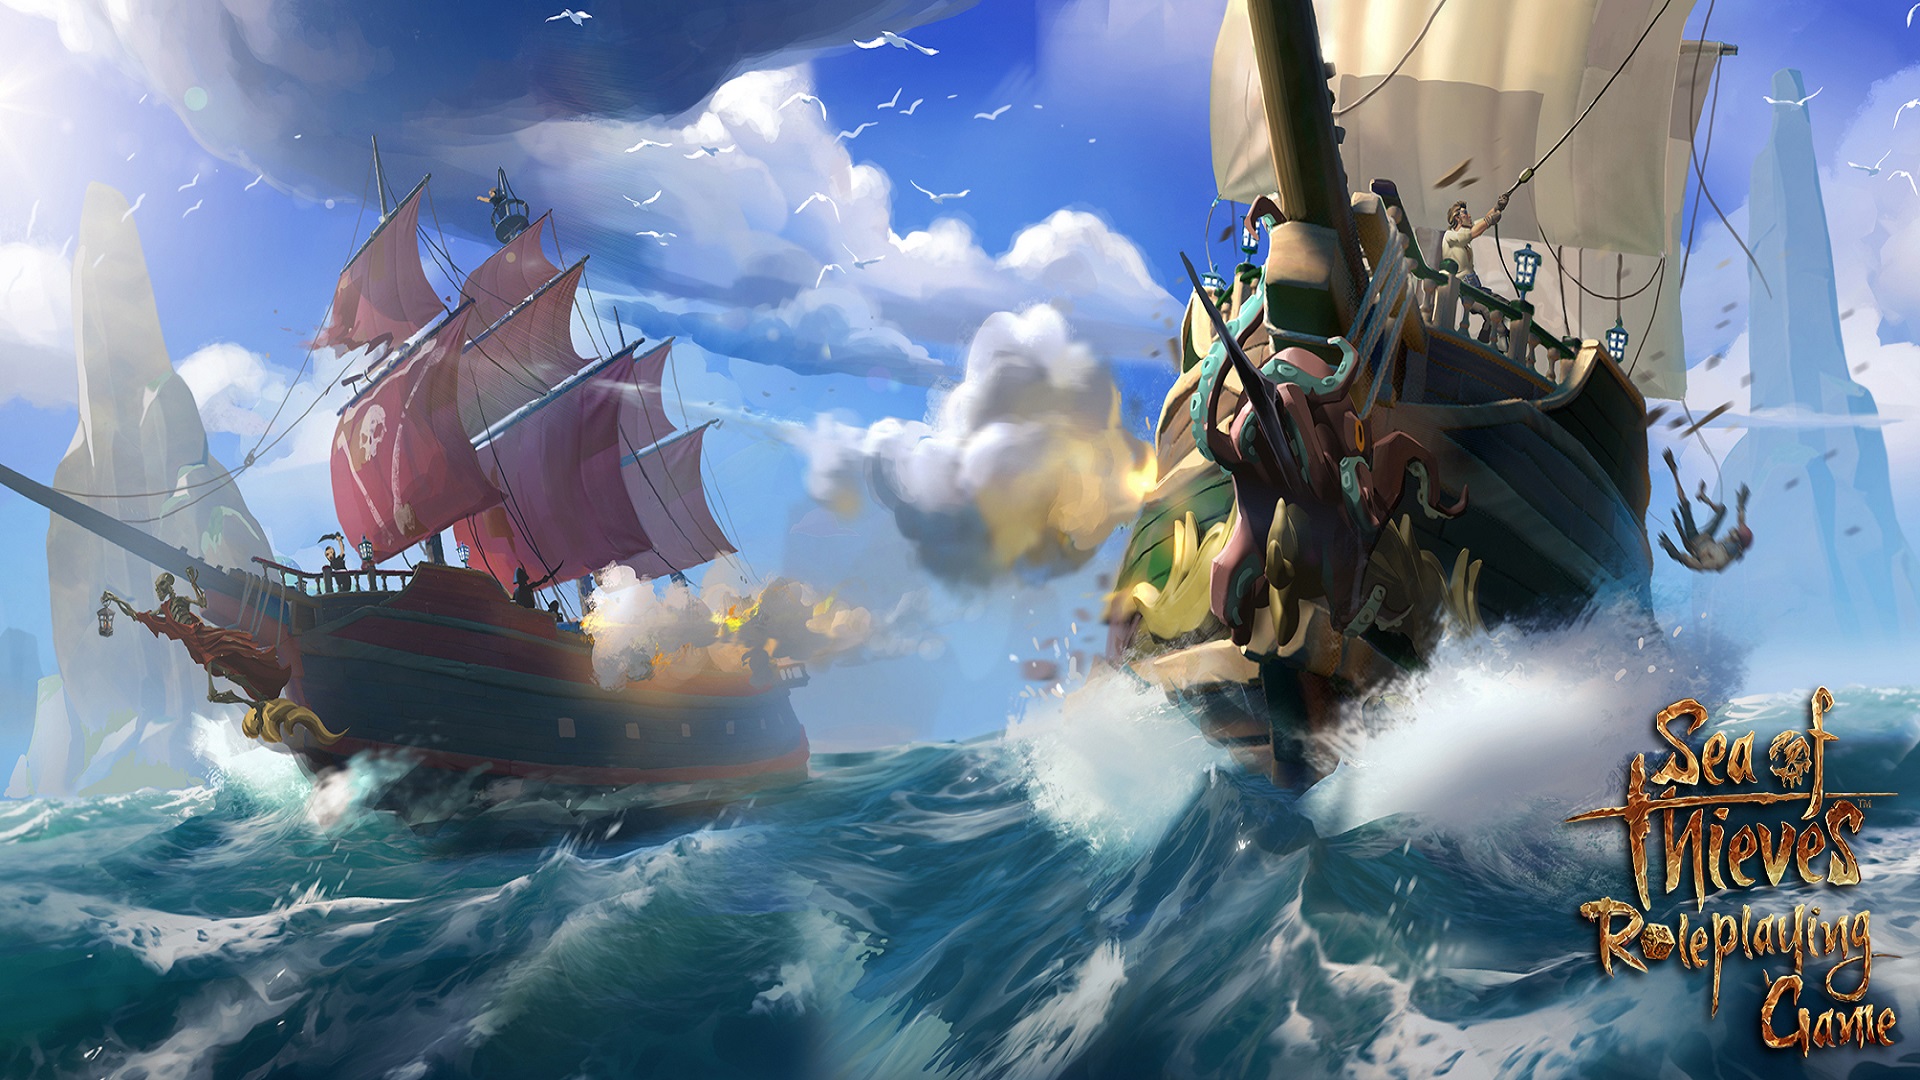 Sea of Thieves Is Getting An Official Tabletop RPG Adaptation